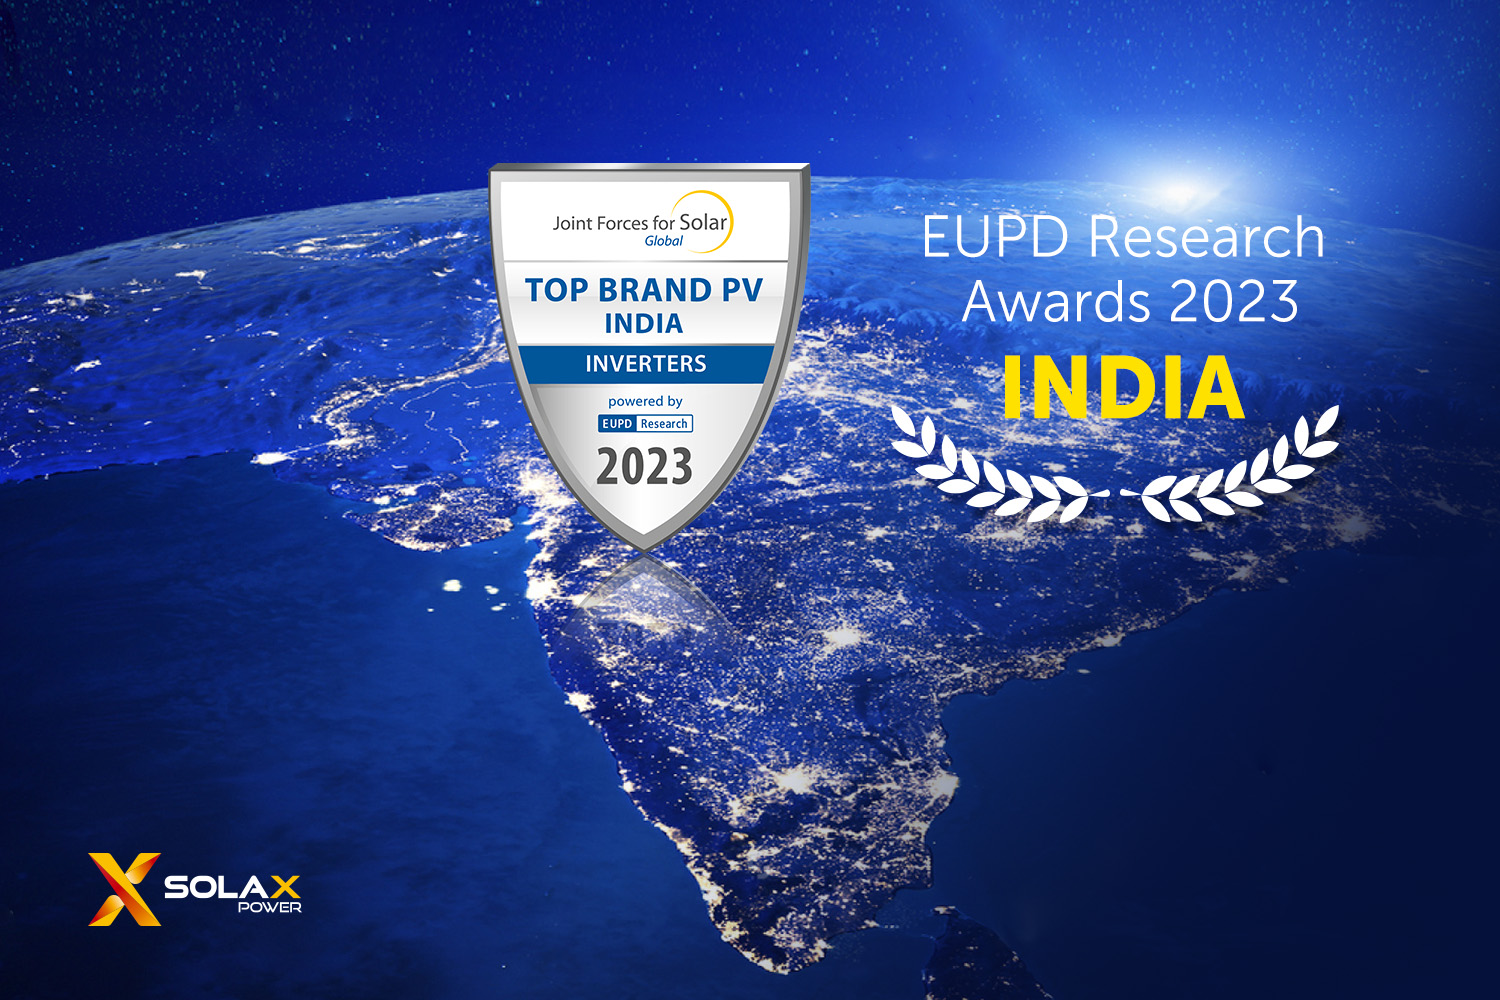 SolaX Awarded “Top Brand PV Inverter” in India by EuPD Research – EQ